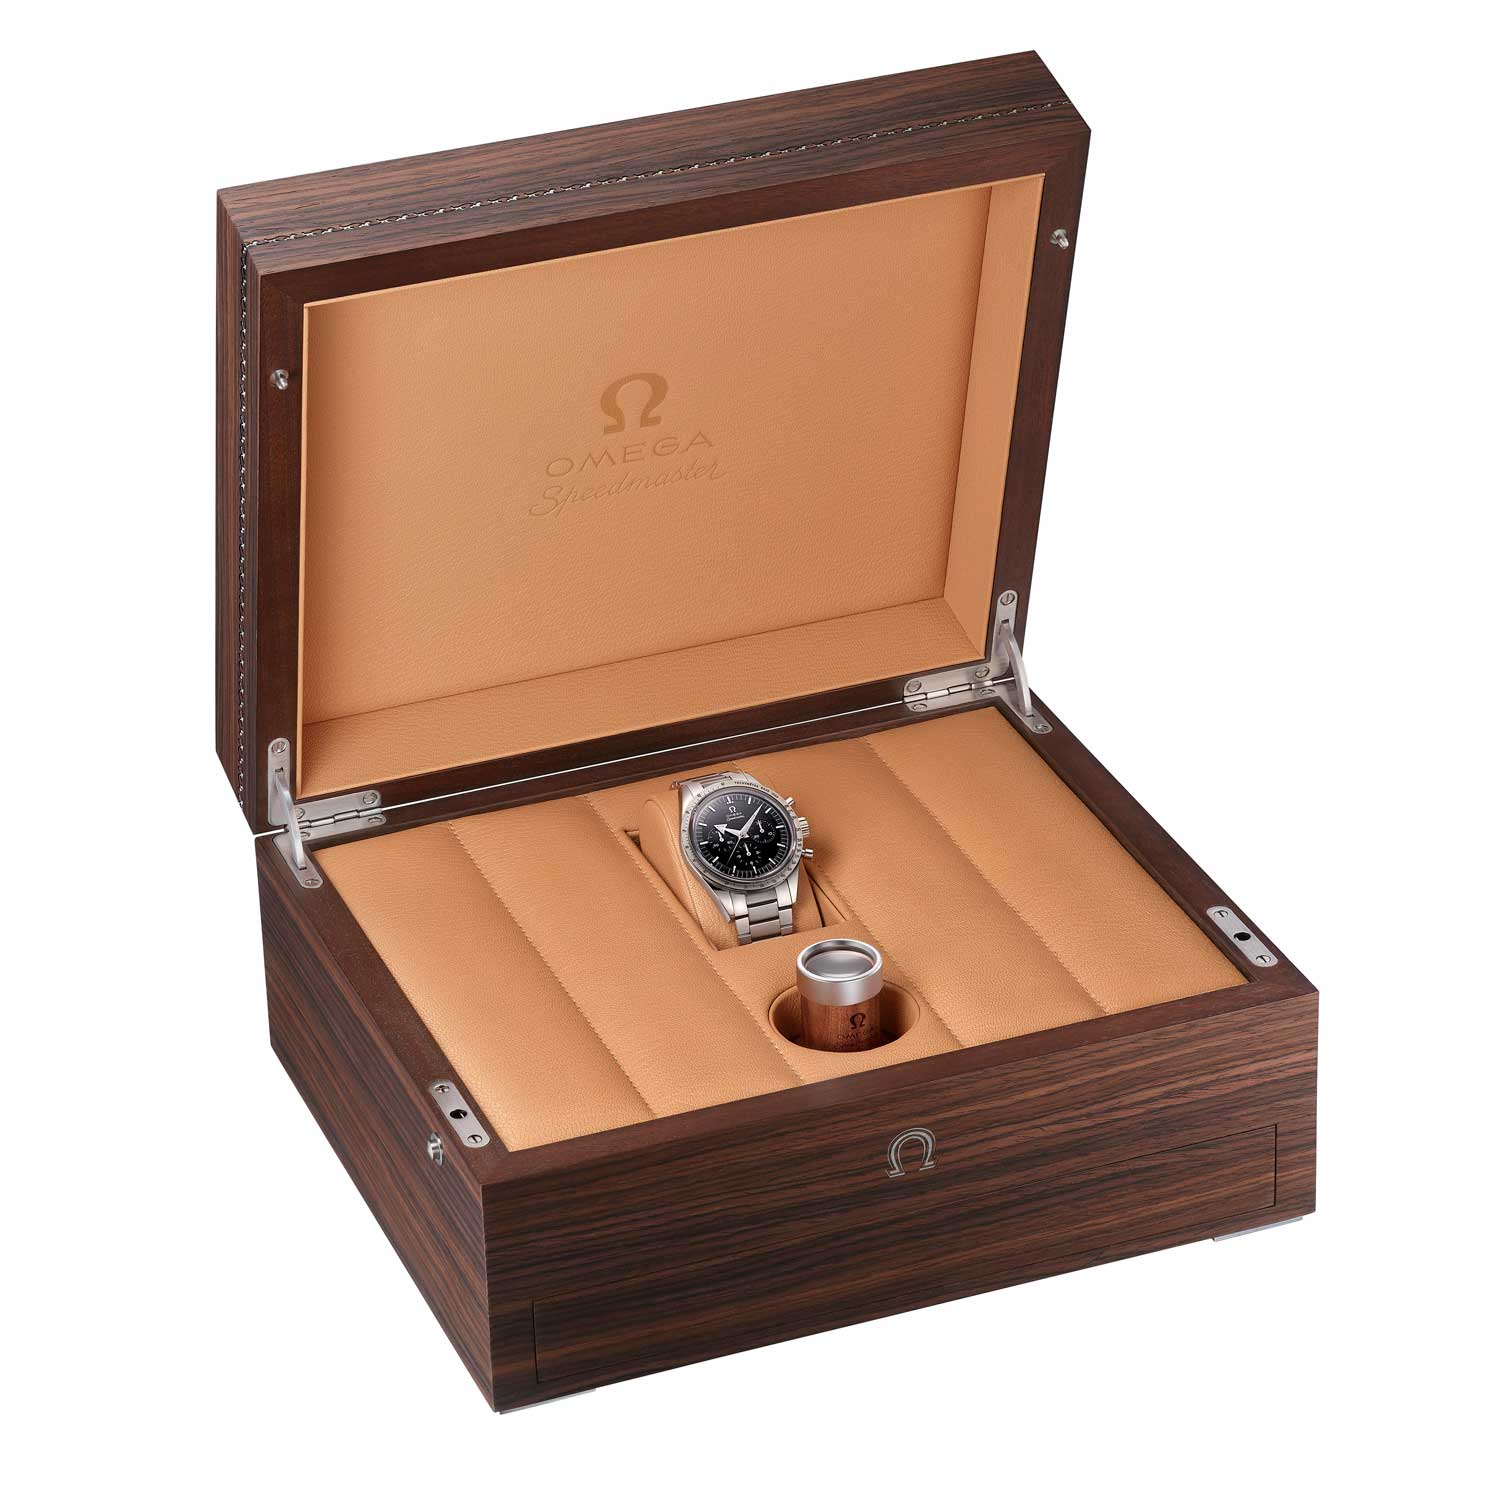 The 2021 ref. 311.50.39.30.01.001 Speedmaster 321 Canopus Gold is presented in a special wooden box, crafted with a Rosewood-like pattern in honor of the collection’s 65th anniversary; the shape and design of the box is inspired by the original Speedmaster boxes that customers would have received in 1957